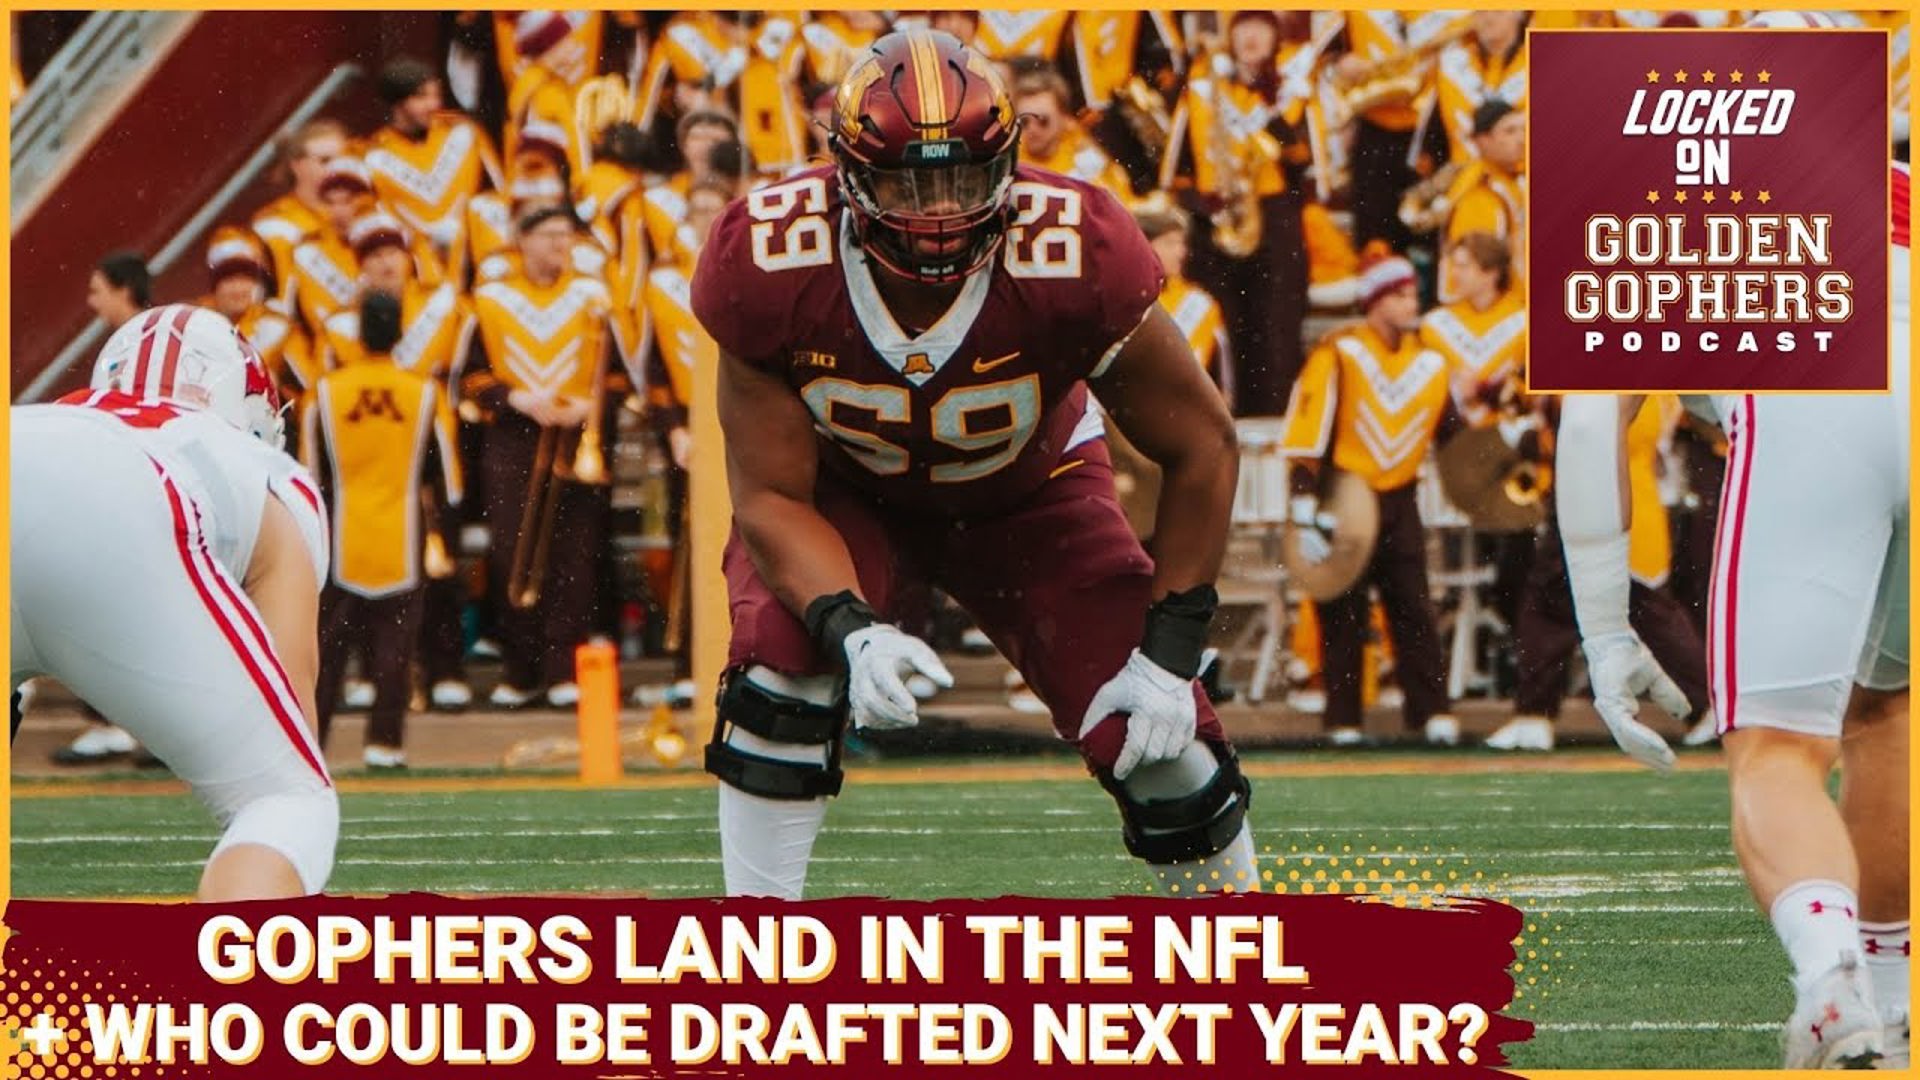 On today's Locked On Golden Gophers, host Kane Rob discusses what the landing spots for the Minnesota Gophers players who were UDFAs after the NFL Draft